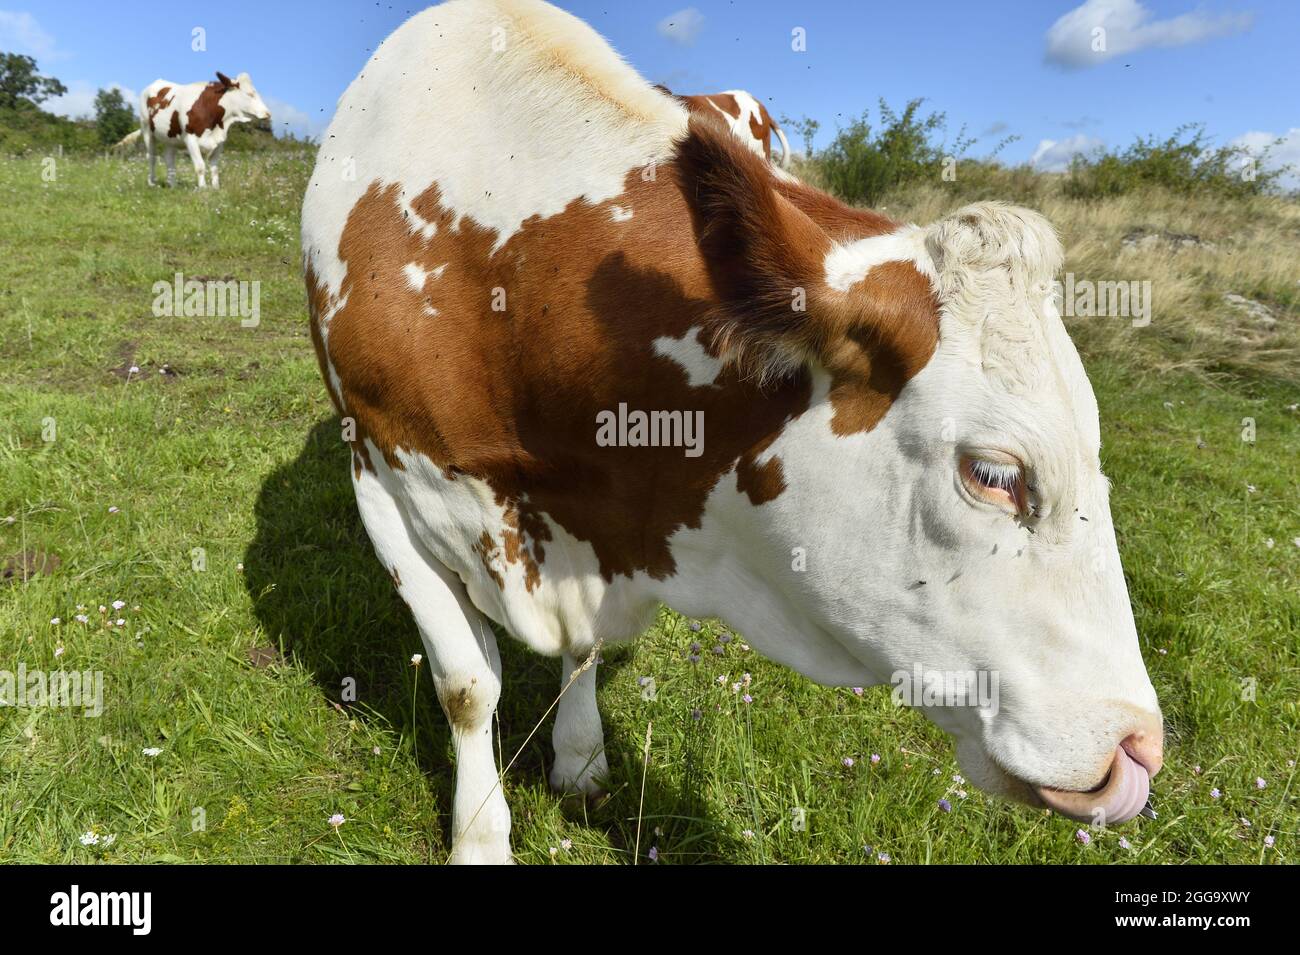 Herd of Cows - Olloix - Auvergne - France Stock Photo